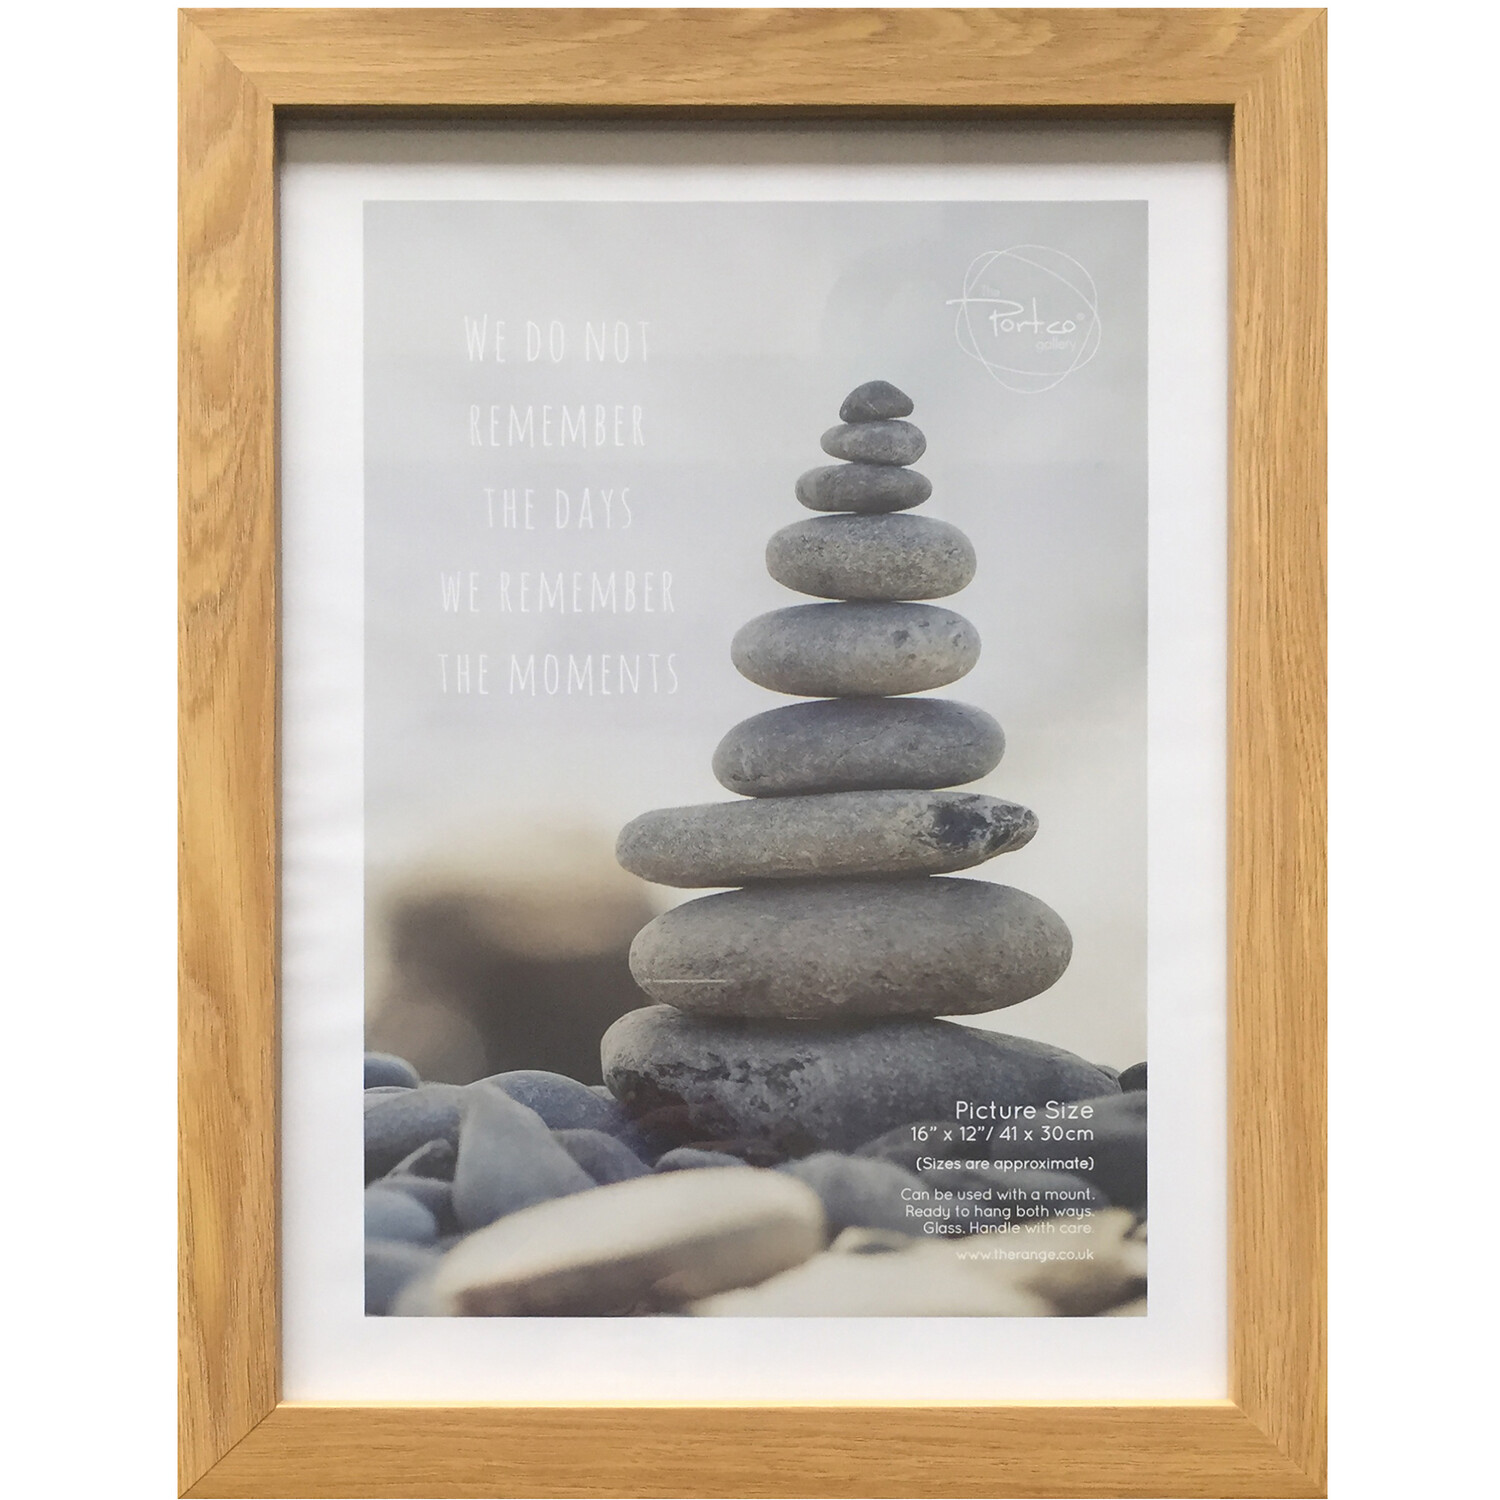 The Port Co Gallery Wood Effect Somerset Photo Frame 10 x 8 inch Image